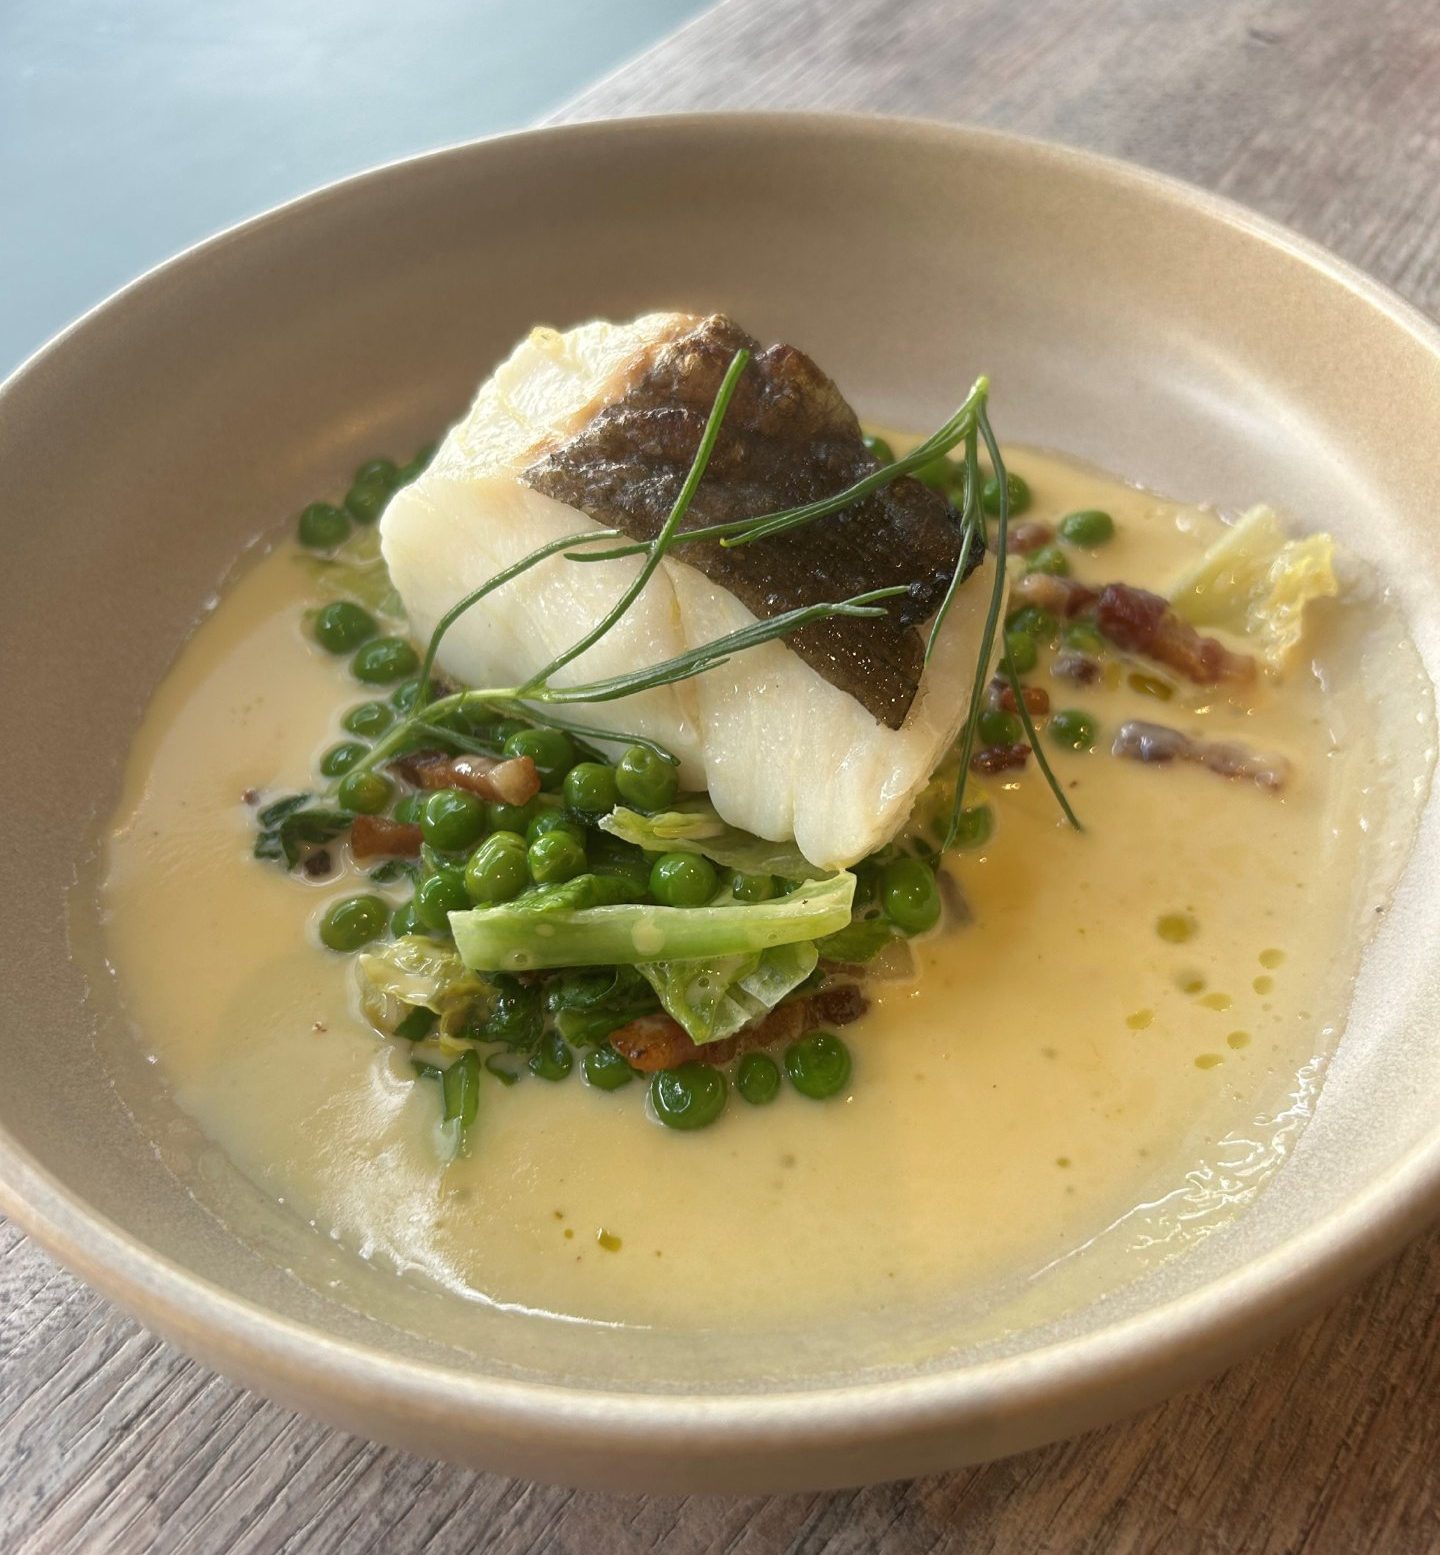 The mouth-watering baked cod with peas a la Francaise.